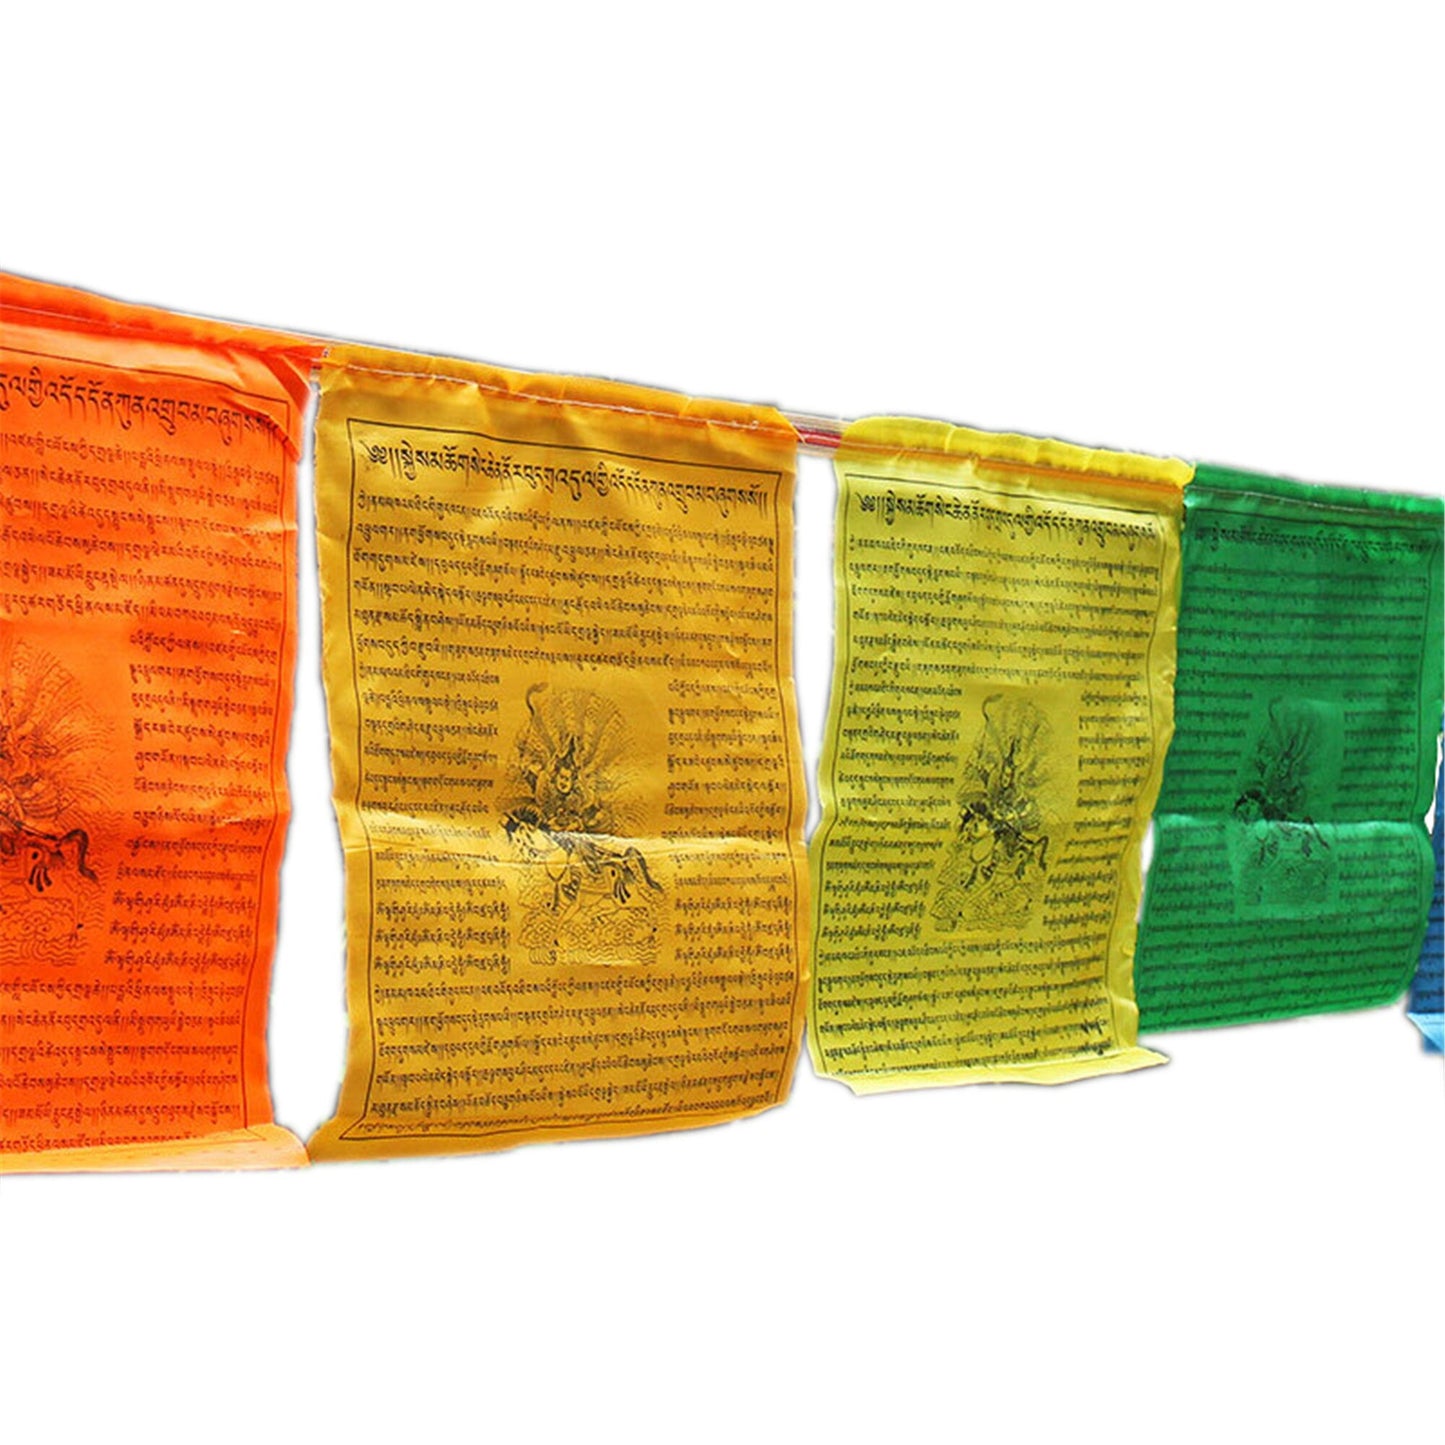 Gandhanra Tibetan Bunting Prayer Flag- Epic of King Gesar,16.5 Ft * 21 Flags,Lungta Flag,Promote Love,Compassion,pPeace,Strength and Wisdom